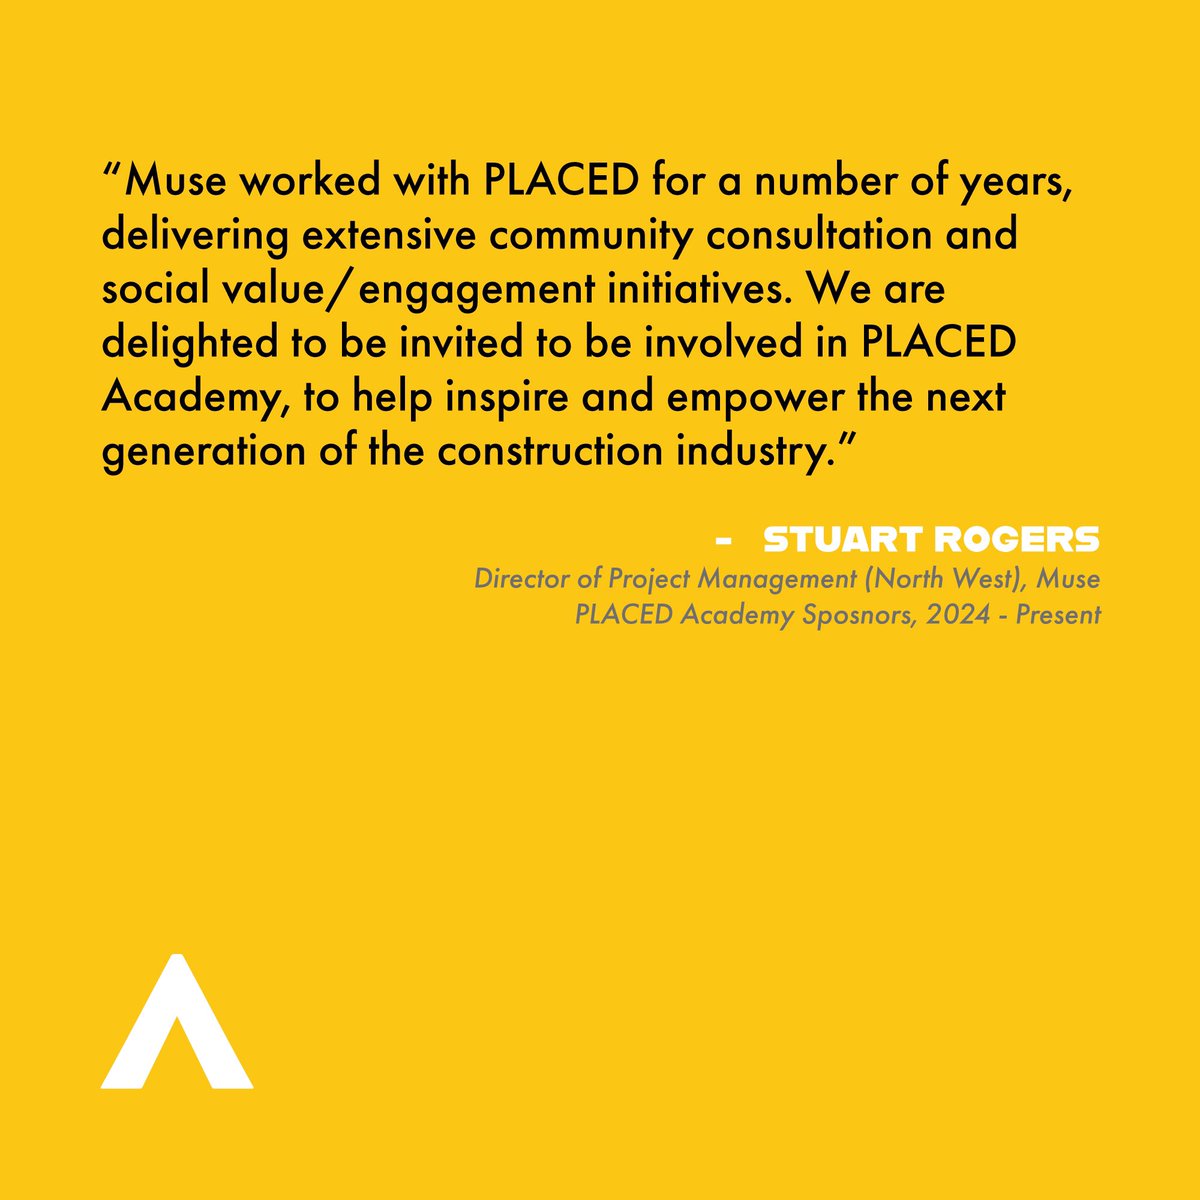 We are very proud to welcome @muse_places onboard our #PLACEDAcademy 2024-25 programme as Sponsors and very grateful for their support! 🎓 To find out more about our sponsorship opportunities, please head to: 🔗 placed-academy.com #PLACED